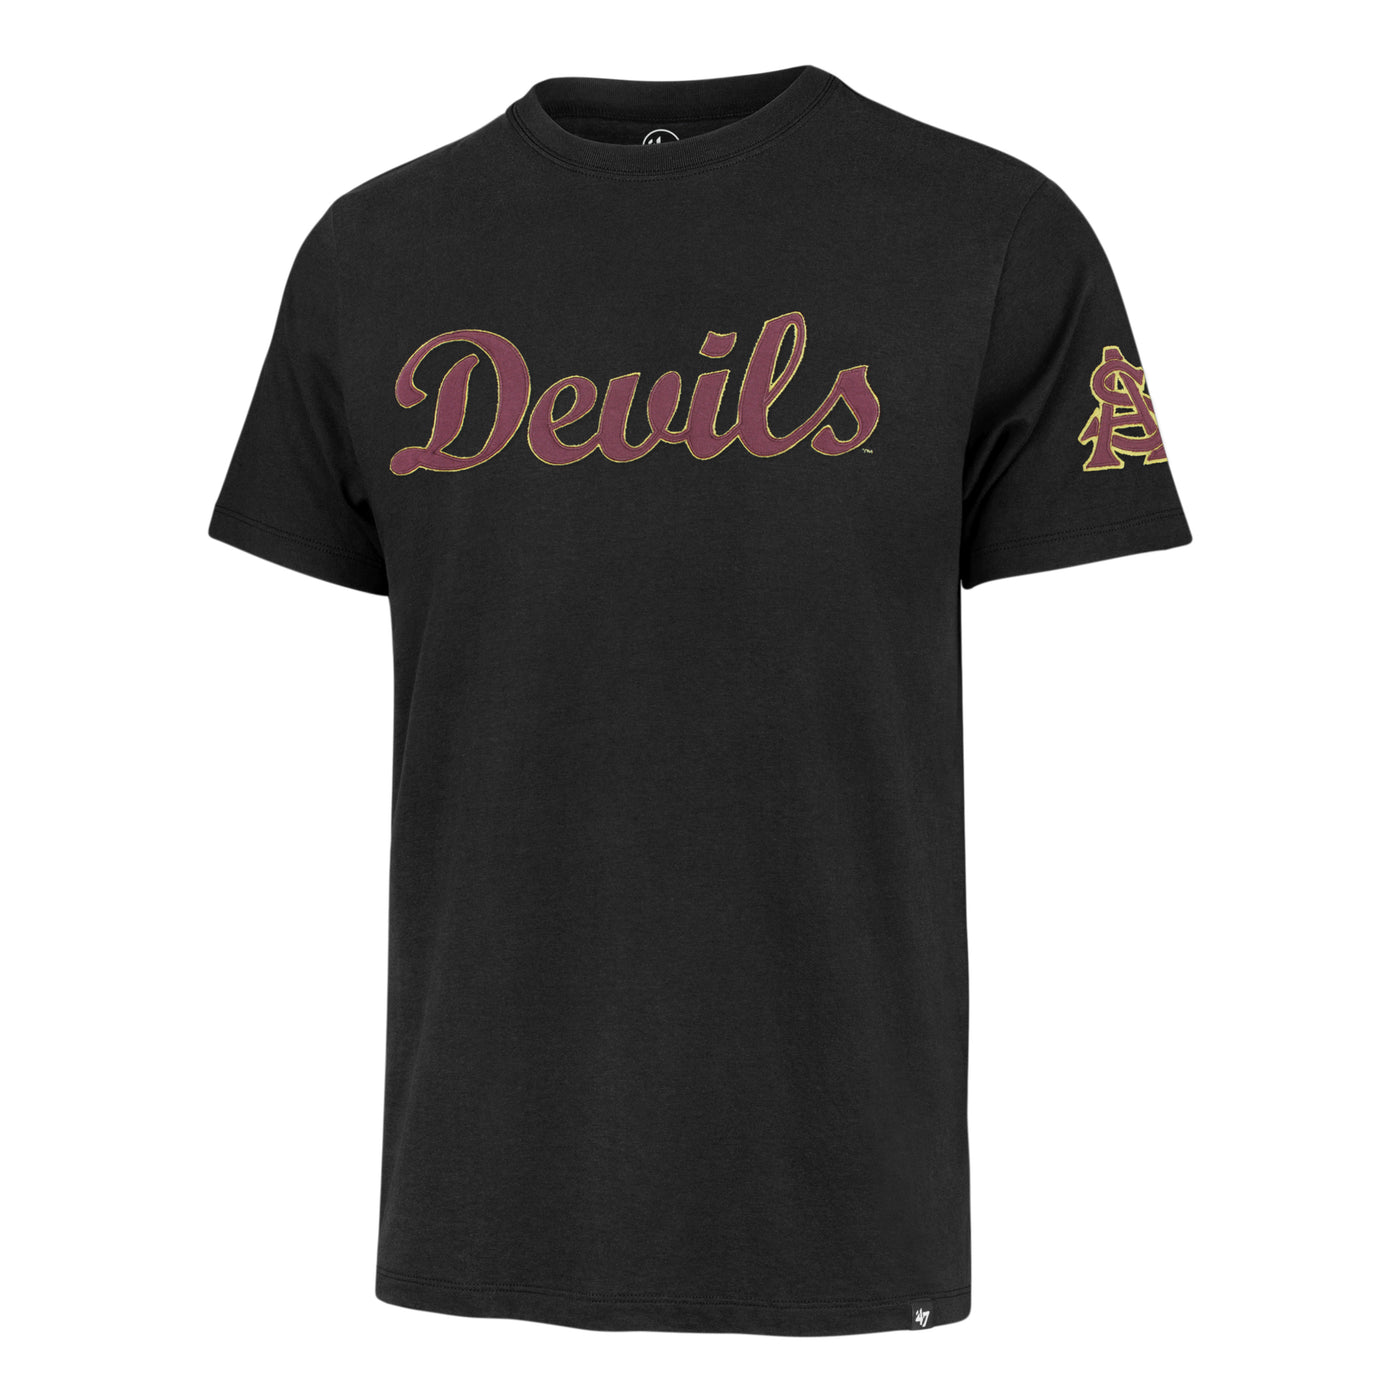 ASU black tee with 'Devils' in curvise lettering sewn into the front and an interlocking 'A' and 'S' on the sleeve